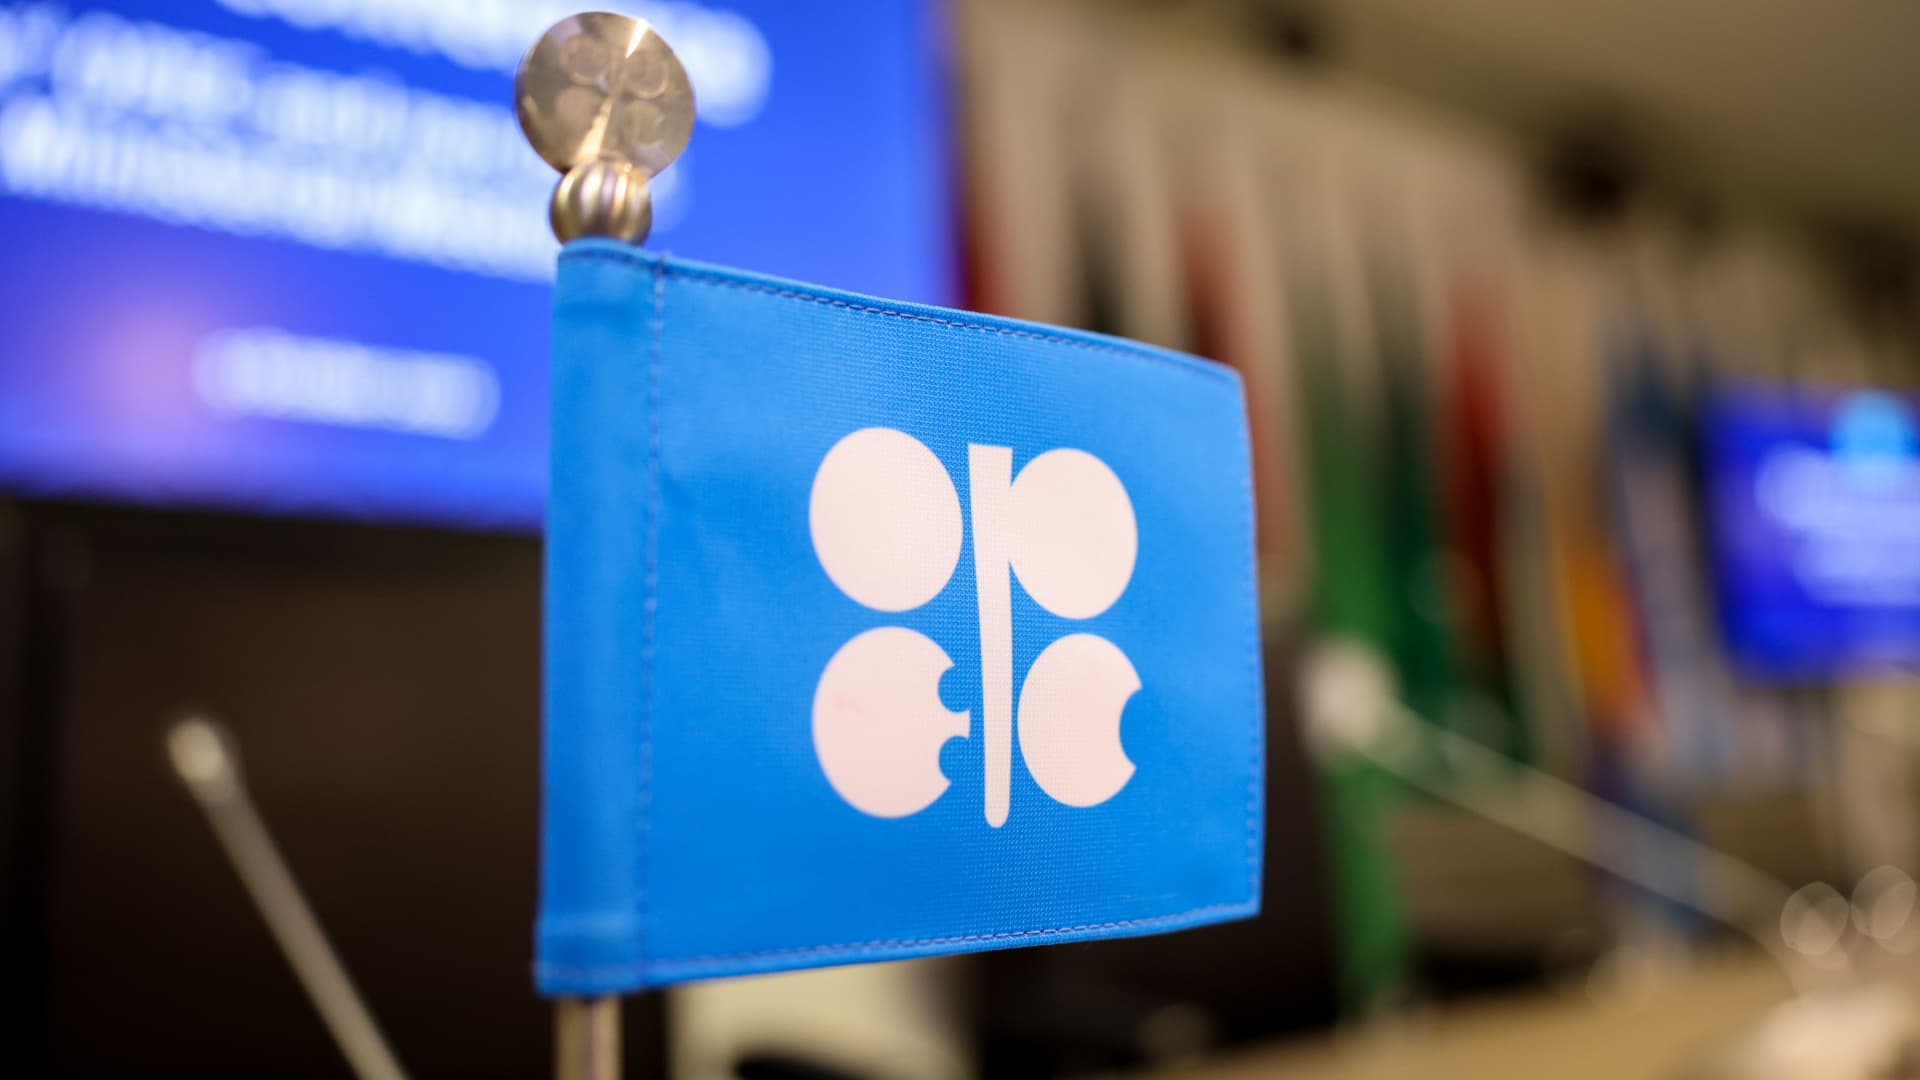 OPEC+ imposes deep production cuts in a bid to shore up prices